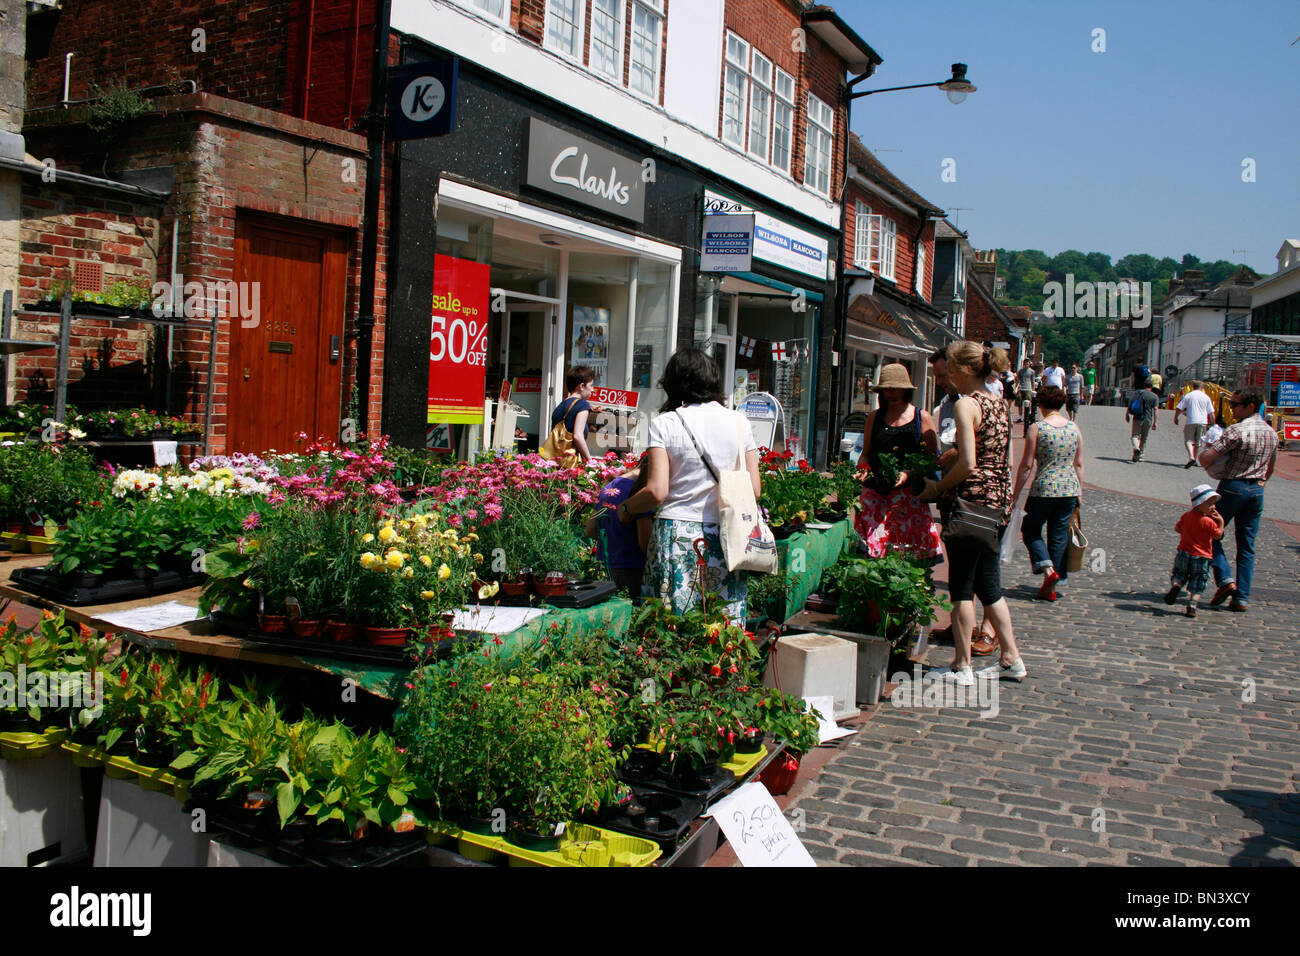 Selling flowers , Cliffe High Street, Lewes, East Sussex Stock Photo